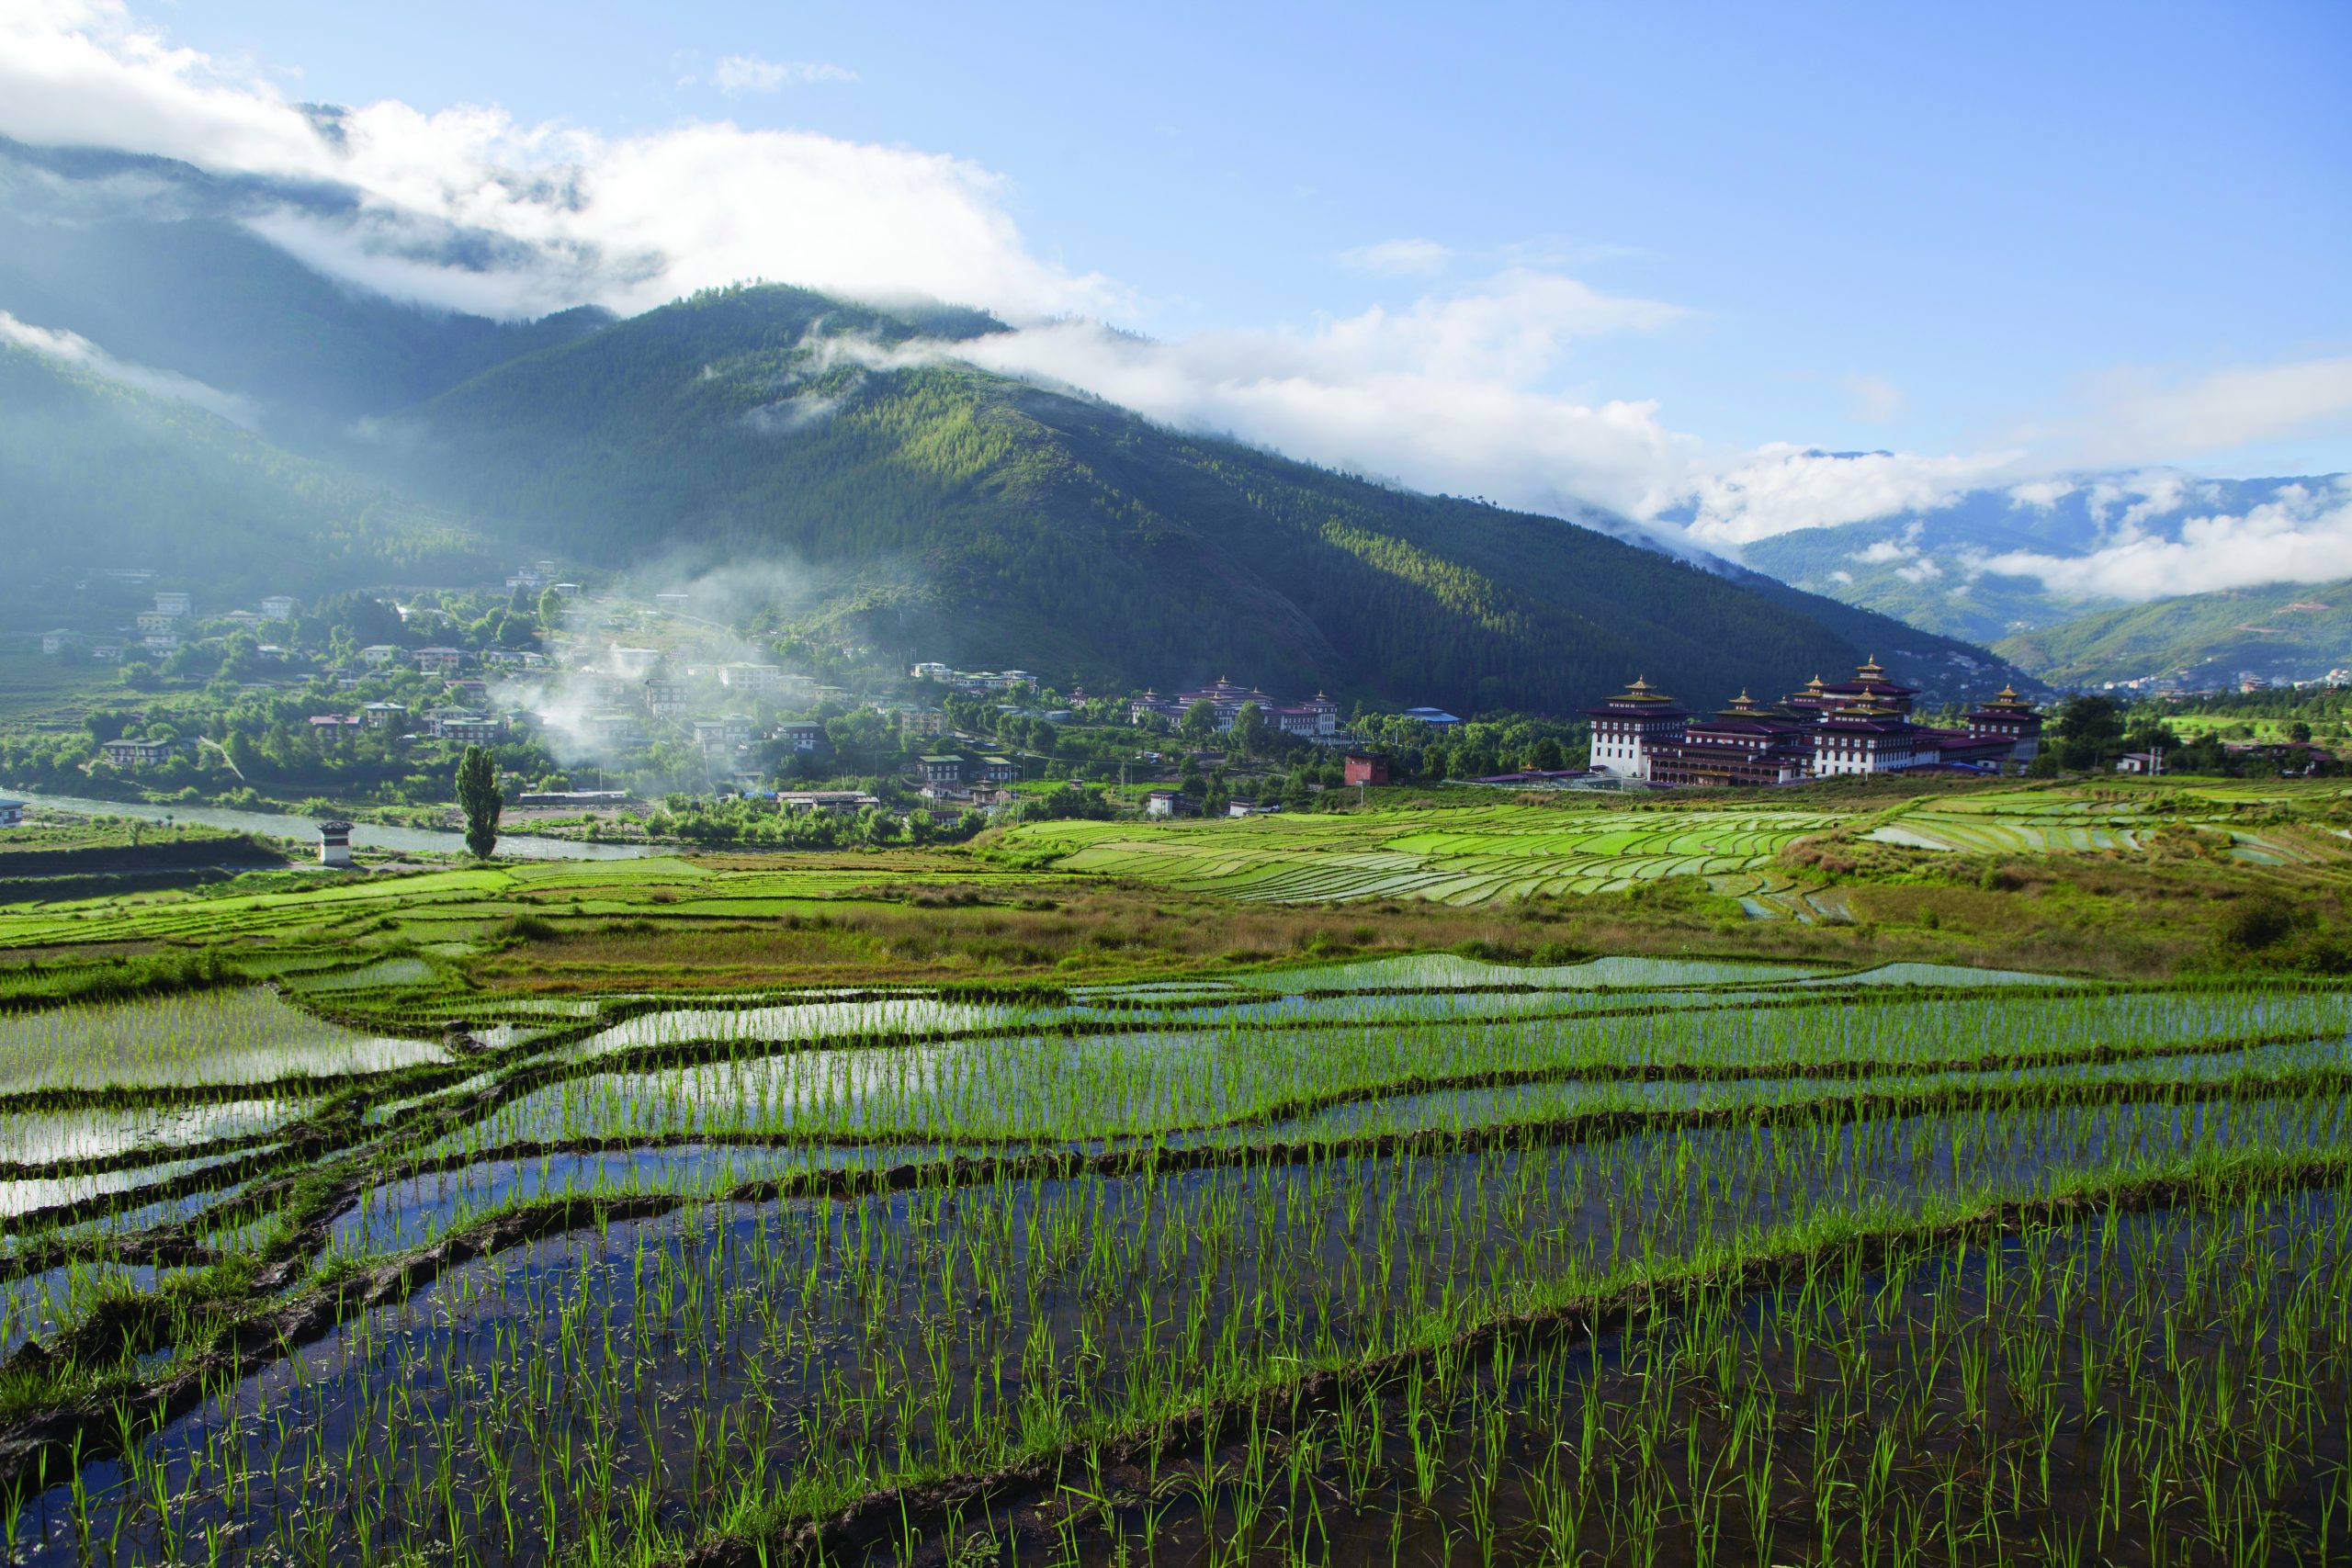 Tashichho Dzong, Thimphu, the capital of Bhutan with the paddy filed in the foreground.